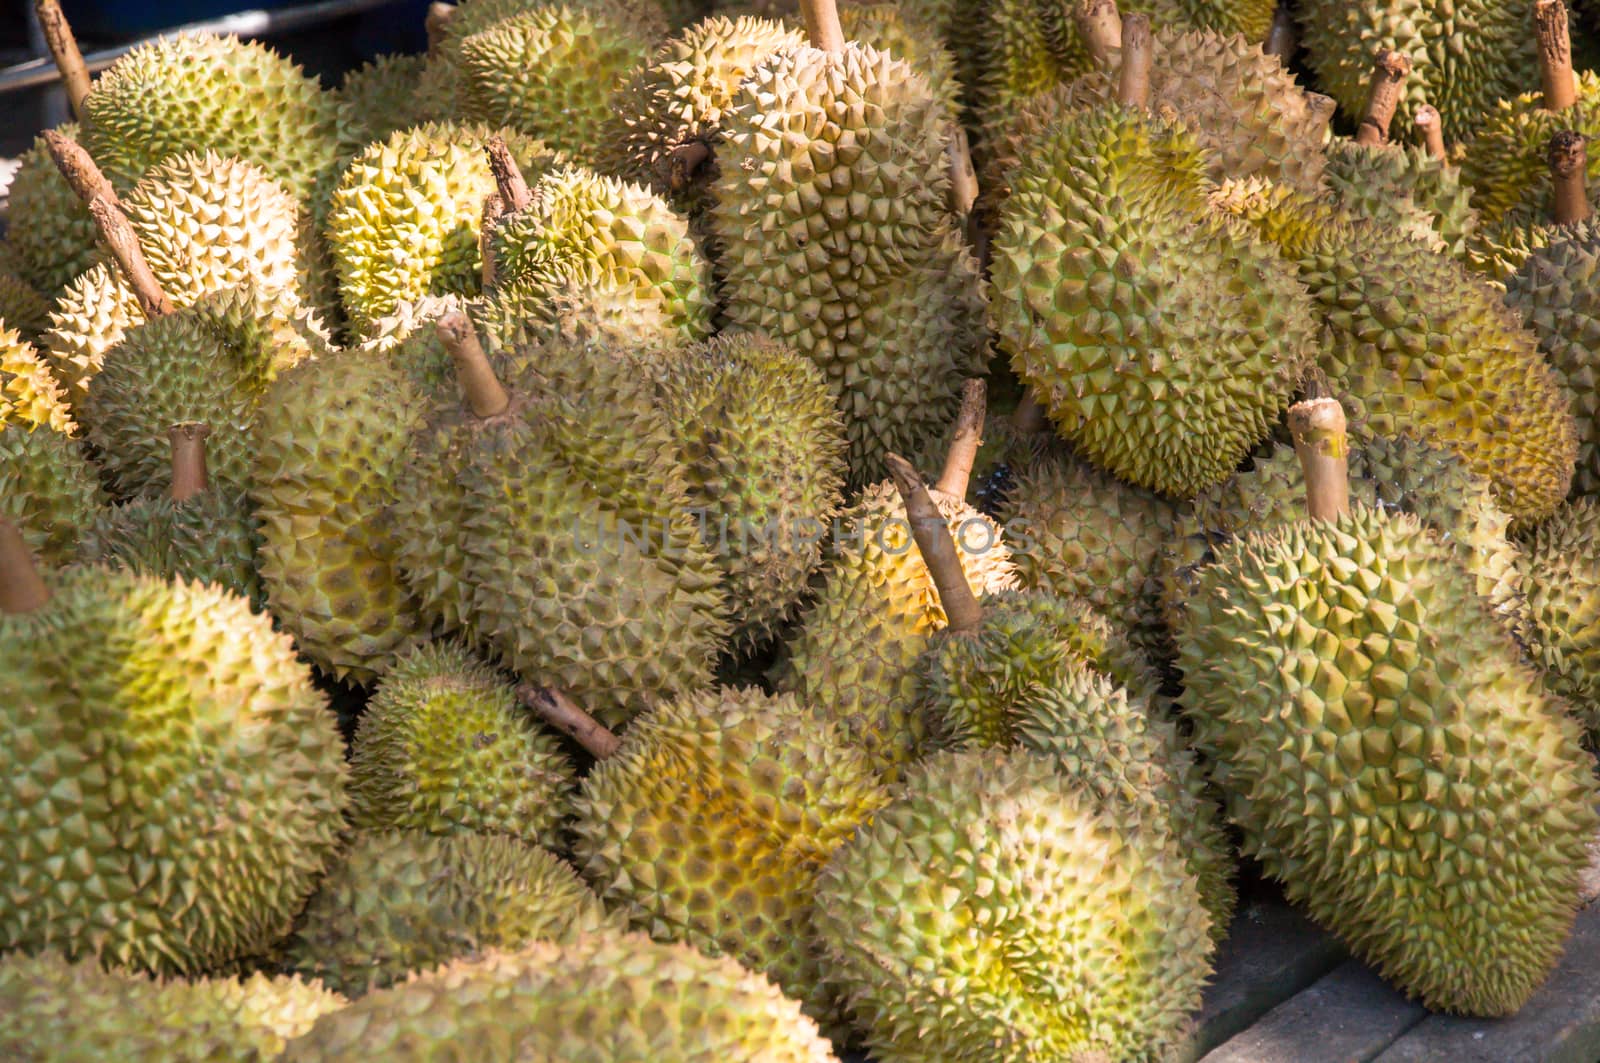 Durian, the world's smelliest fruit, the king of fruit in much of south-east Asia.